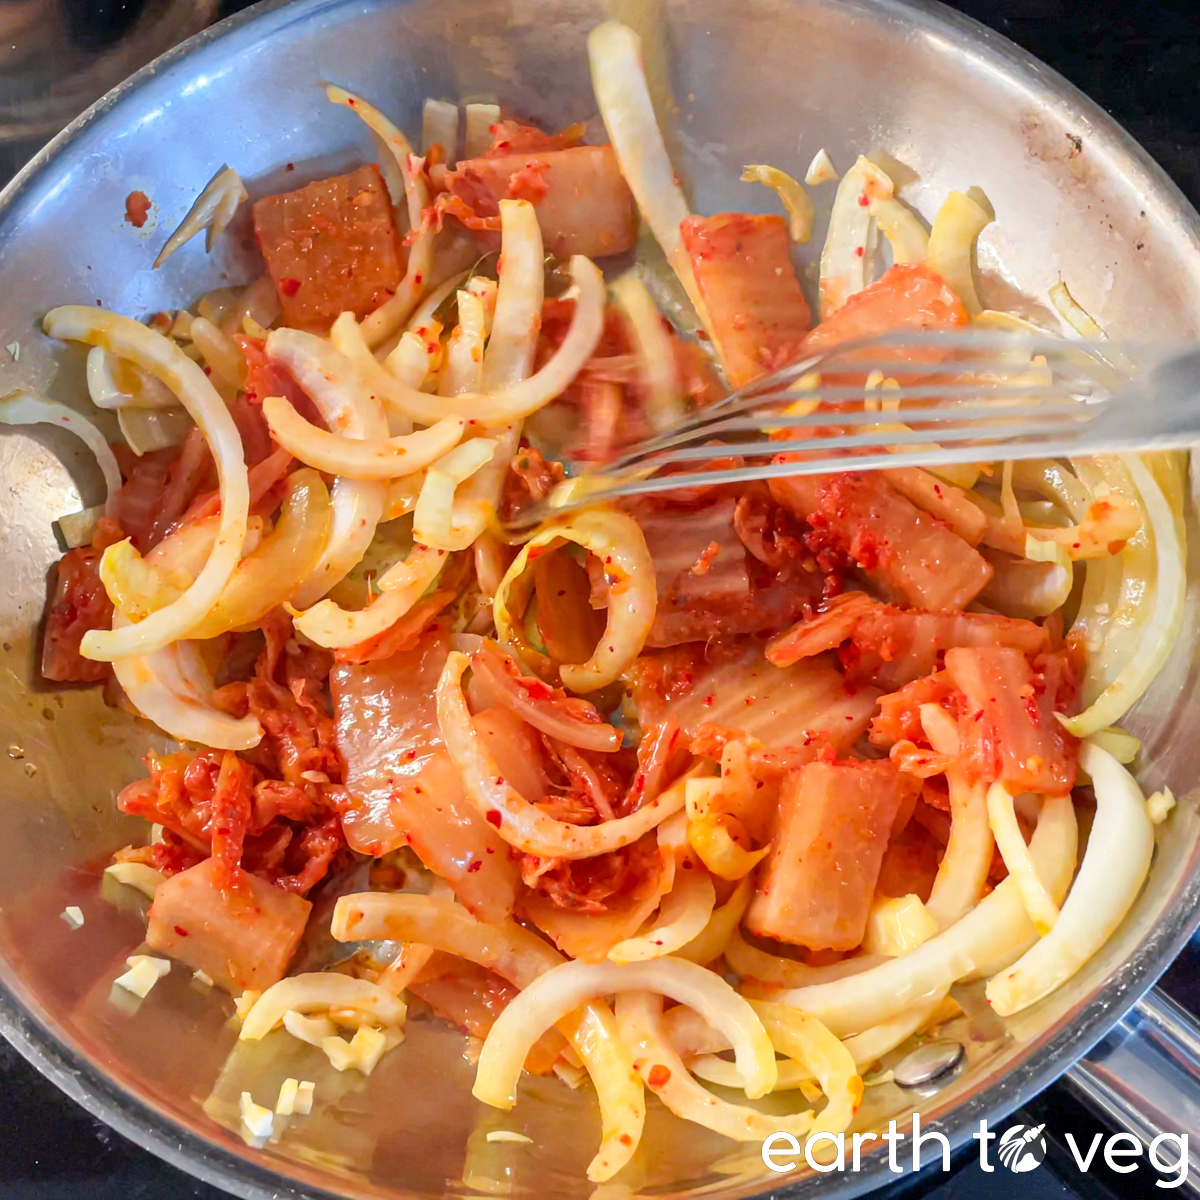 Kimchi, onions, and garlic are sautéed together in a stainless steel pan.